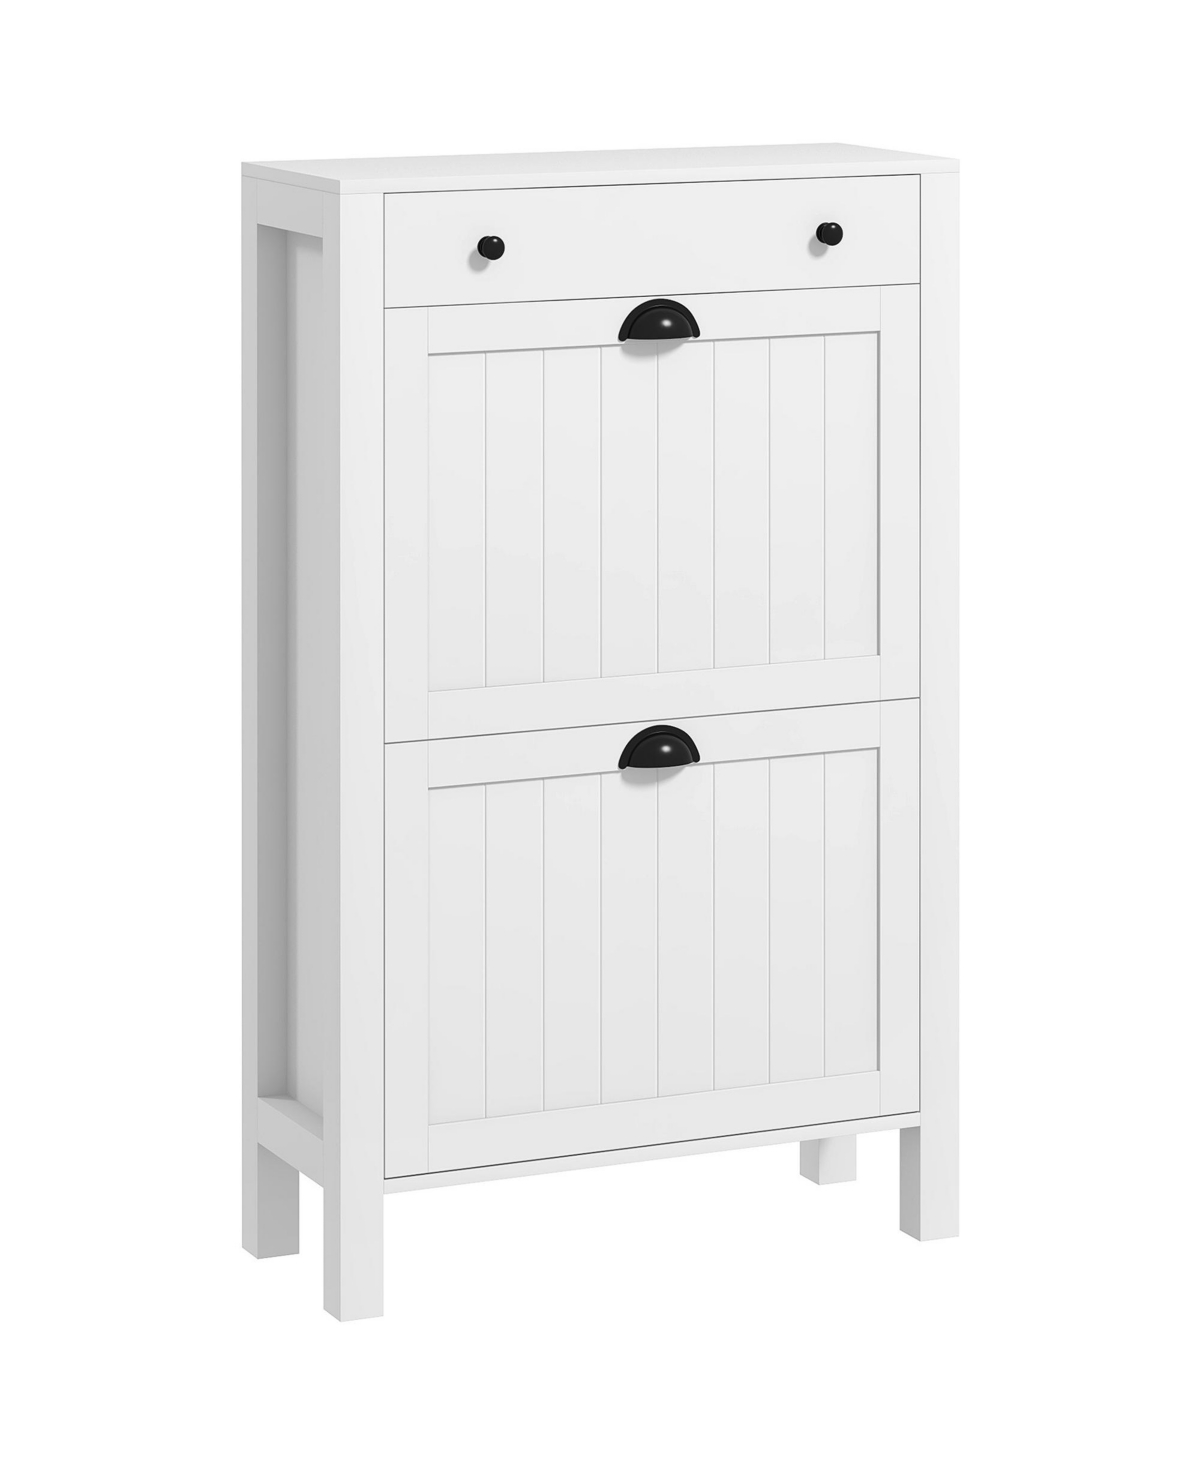 Shoe Storage Cabinet with 2 Flip Drawers for 8 Pairs of Shoes - White